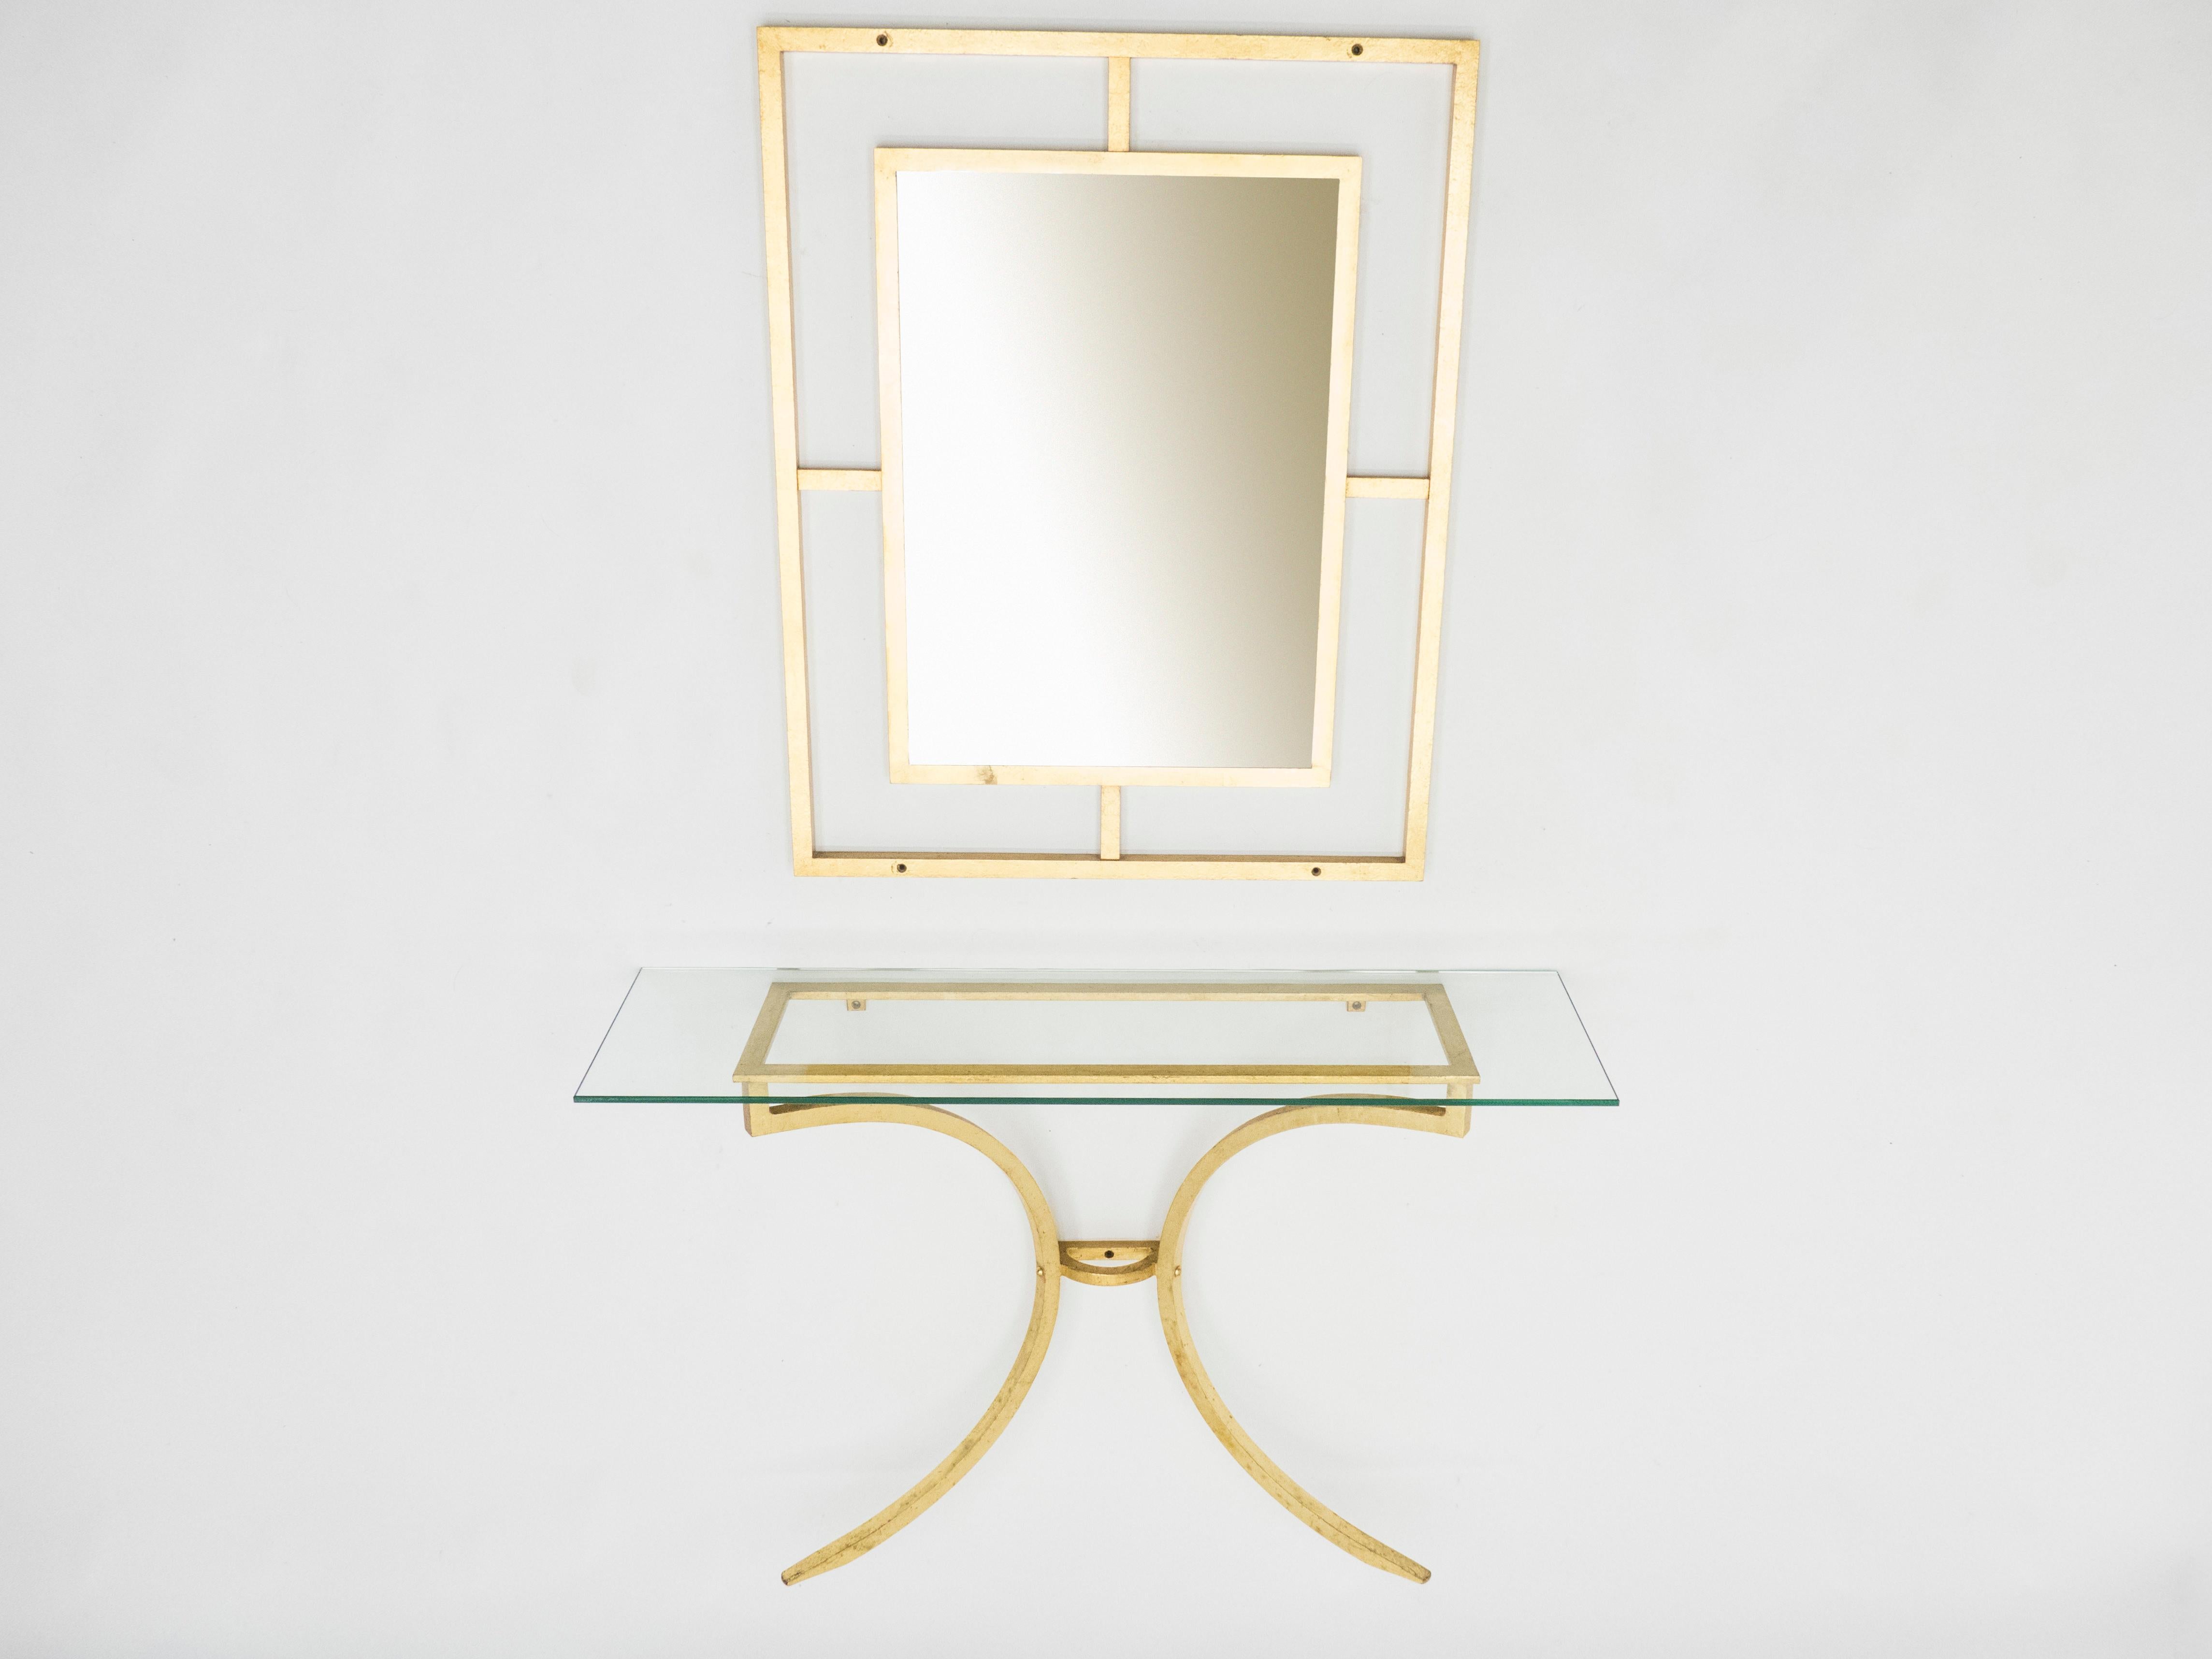 Mid-20th Century Rare Roger Thibier Gilt Wrought Iron Gold Leaf Console Table with Mirror, 1960s For Sale